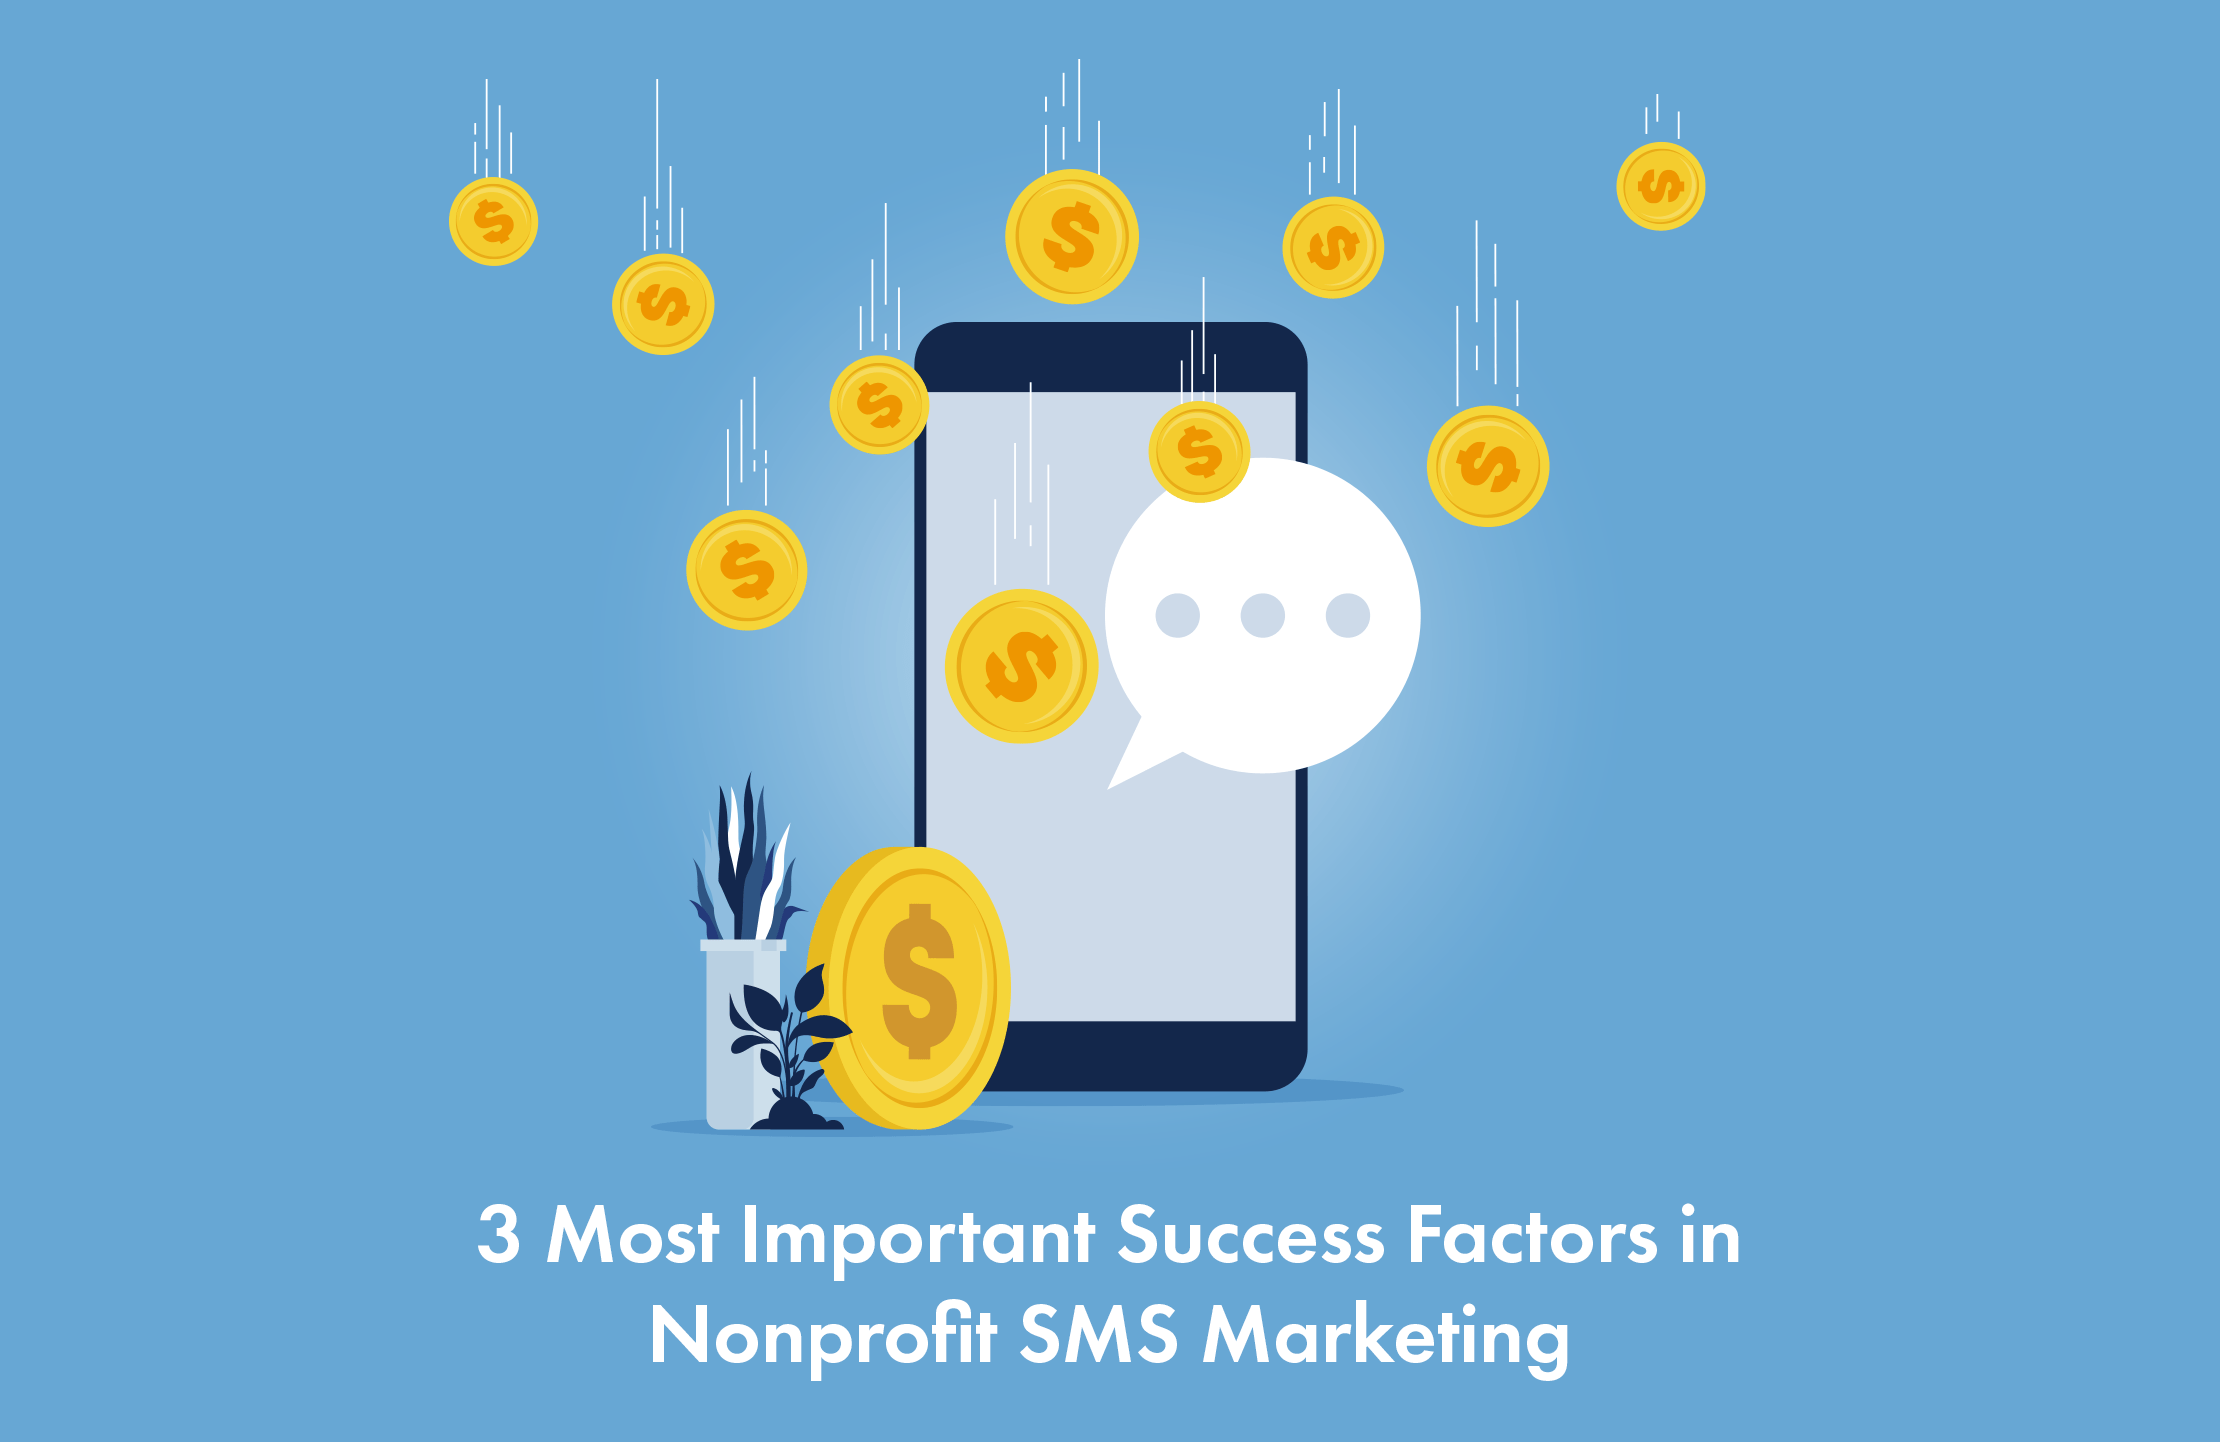 The 3 most important reasons for the success of non-profit SMS marketing